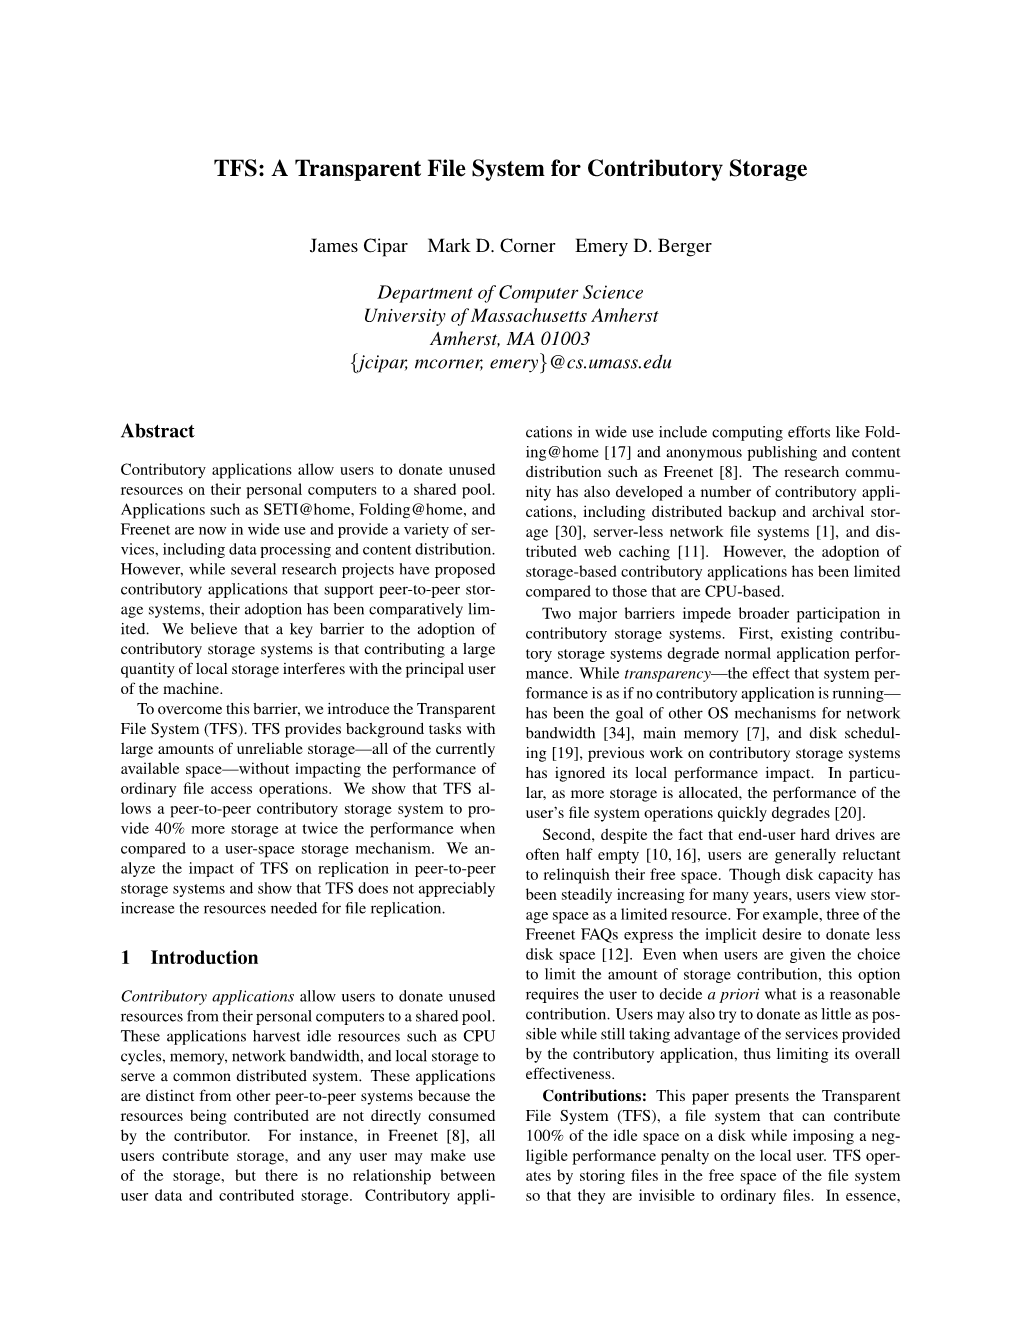 TFS: a Transparent File System for Contributory Storage